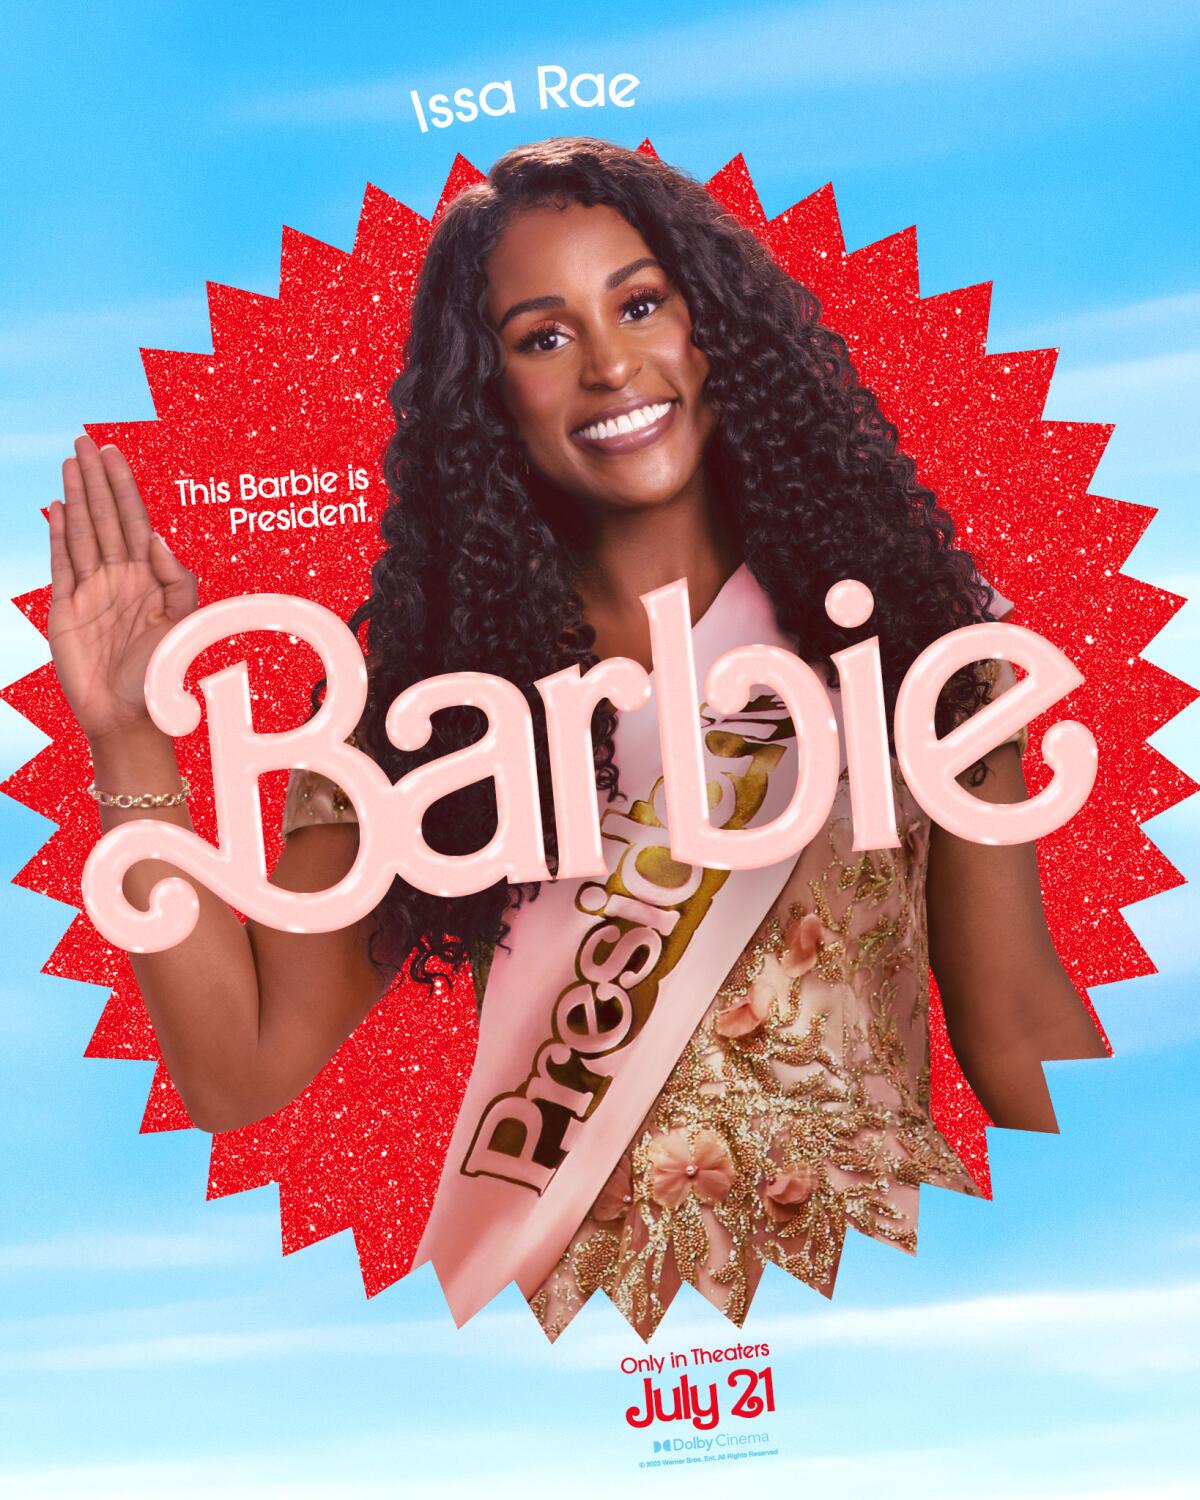 Issa Rae smiles and waves in a "Barbie" movie poster. She wears a gold dress and a pink "President" sash.